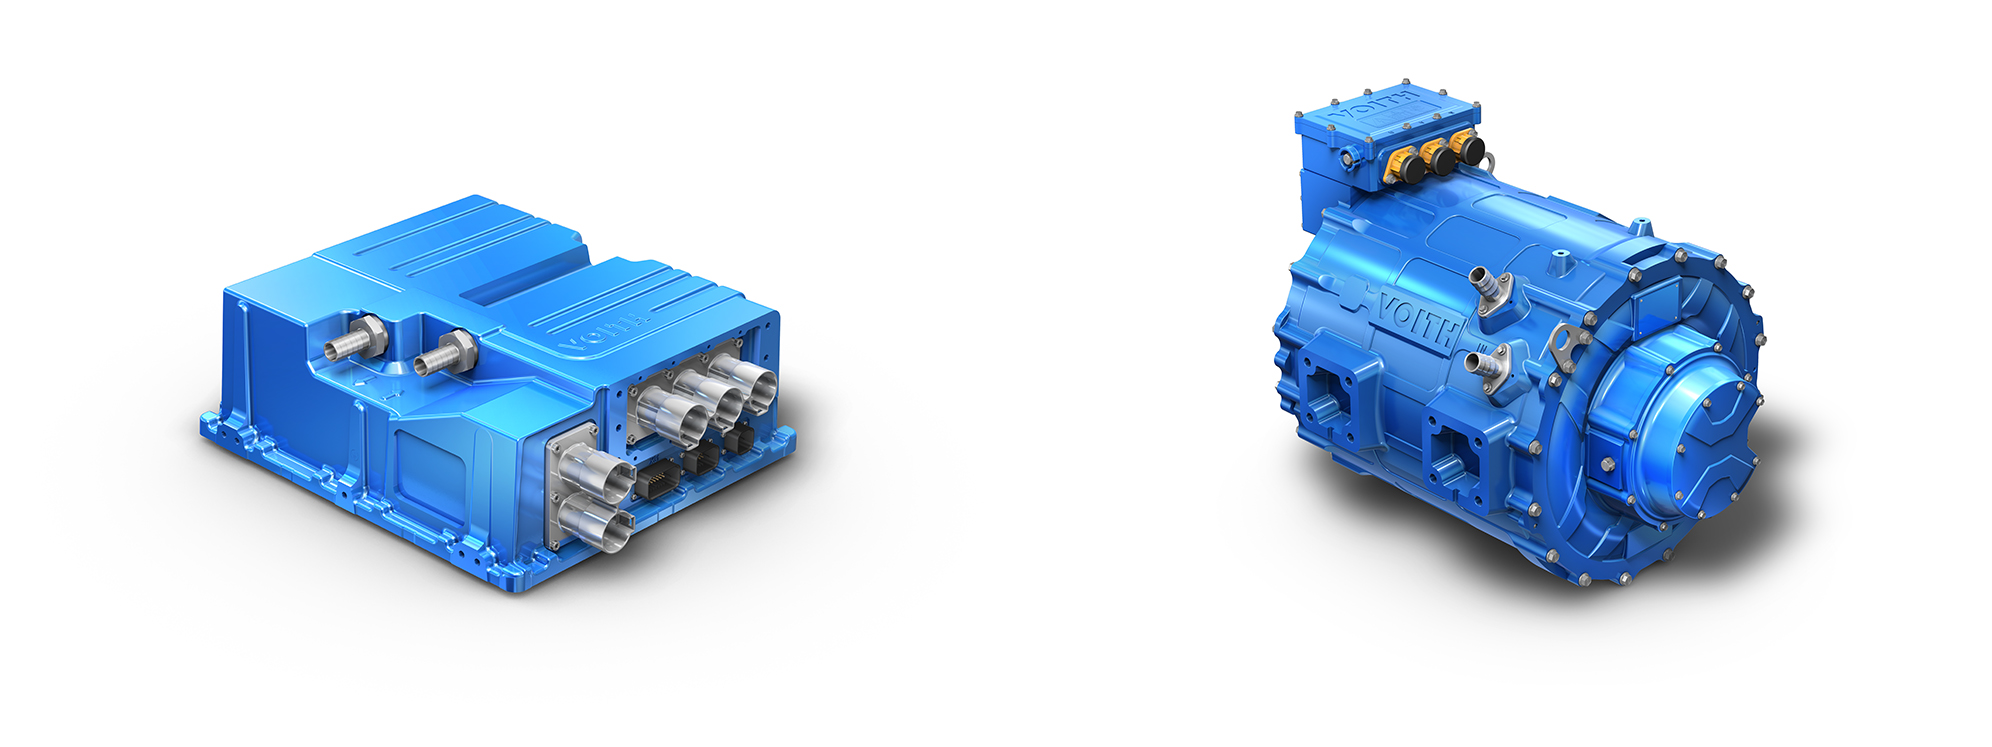 The future inverter platform (FIP) and HD motor, core components of the Voith Electrical Drive System.